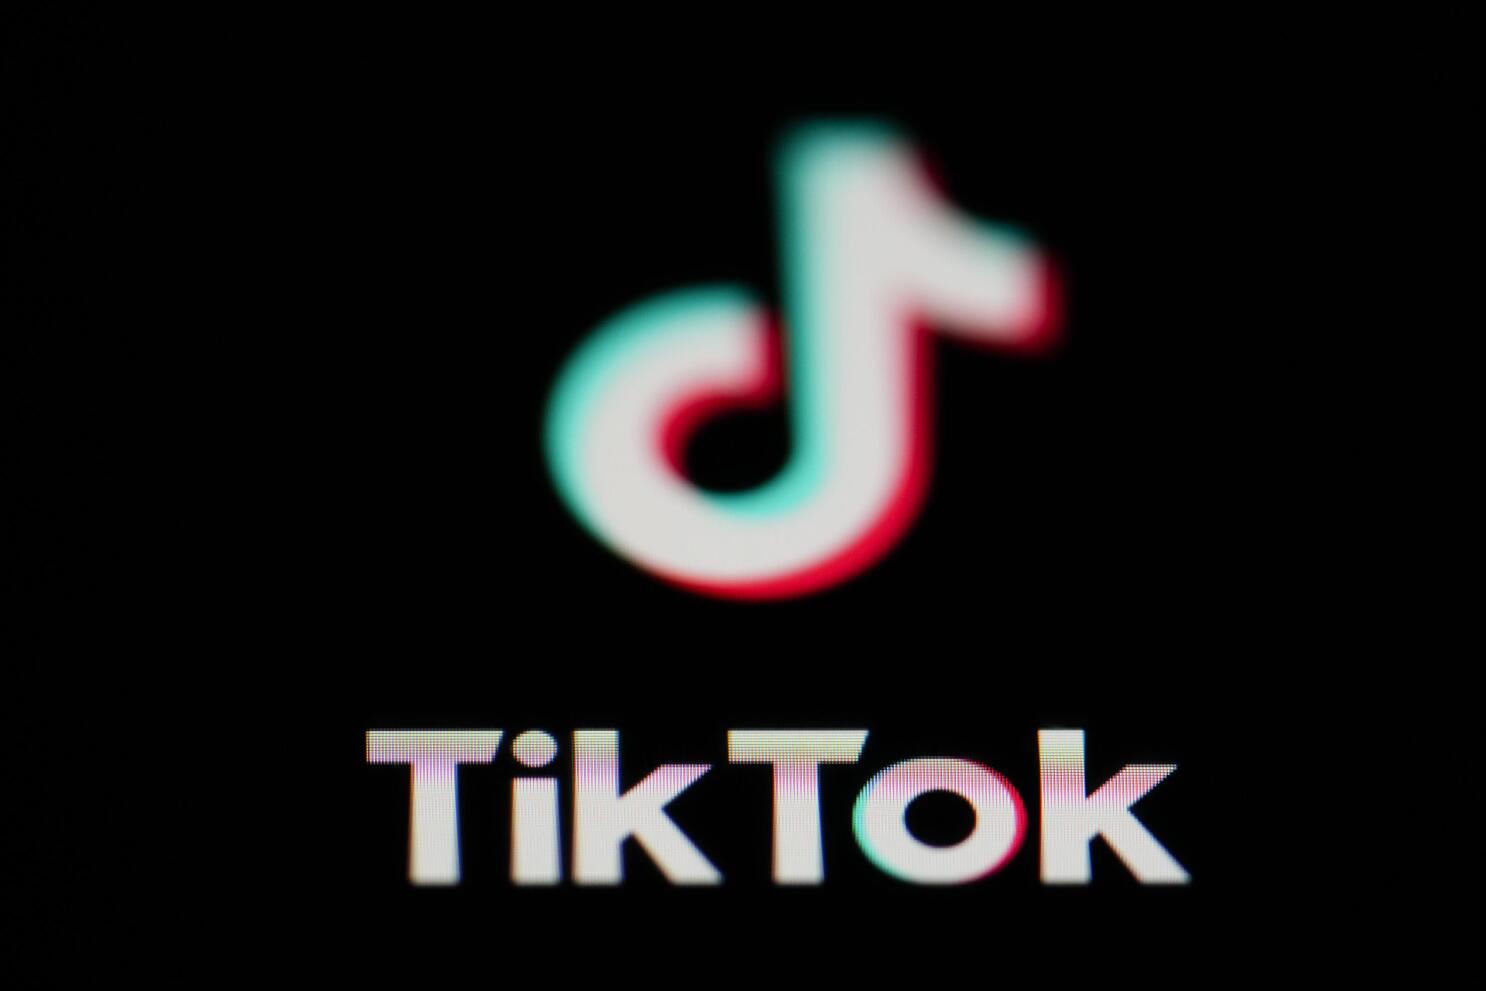 Is TikTok a threat to national security?